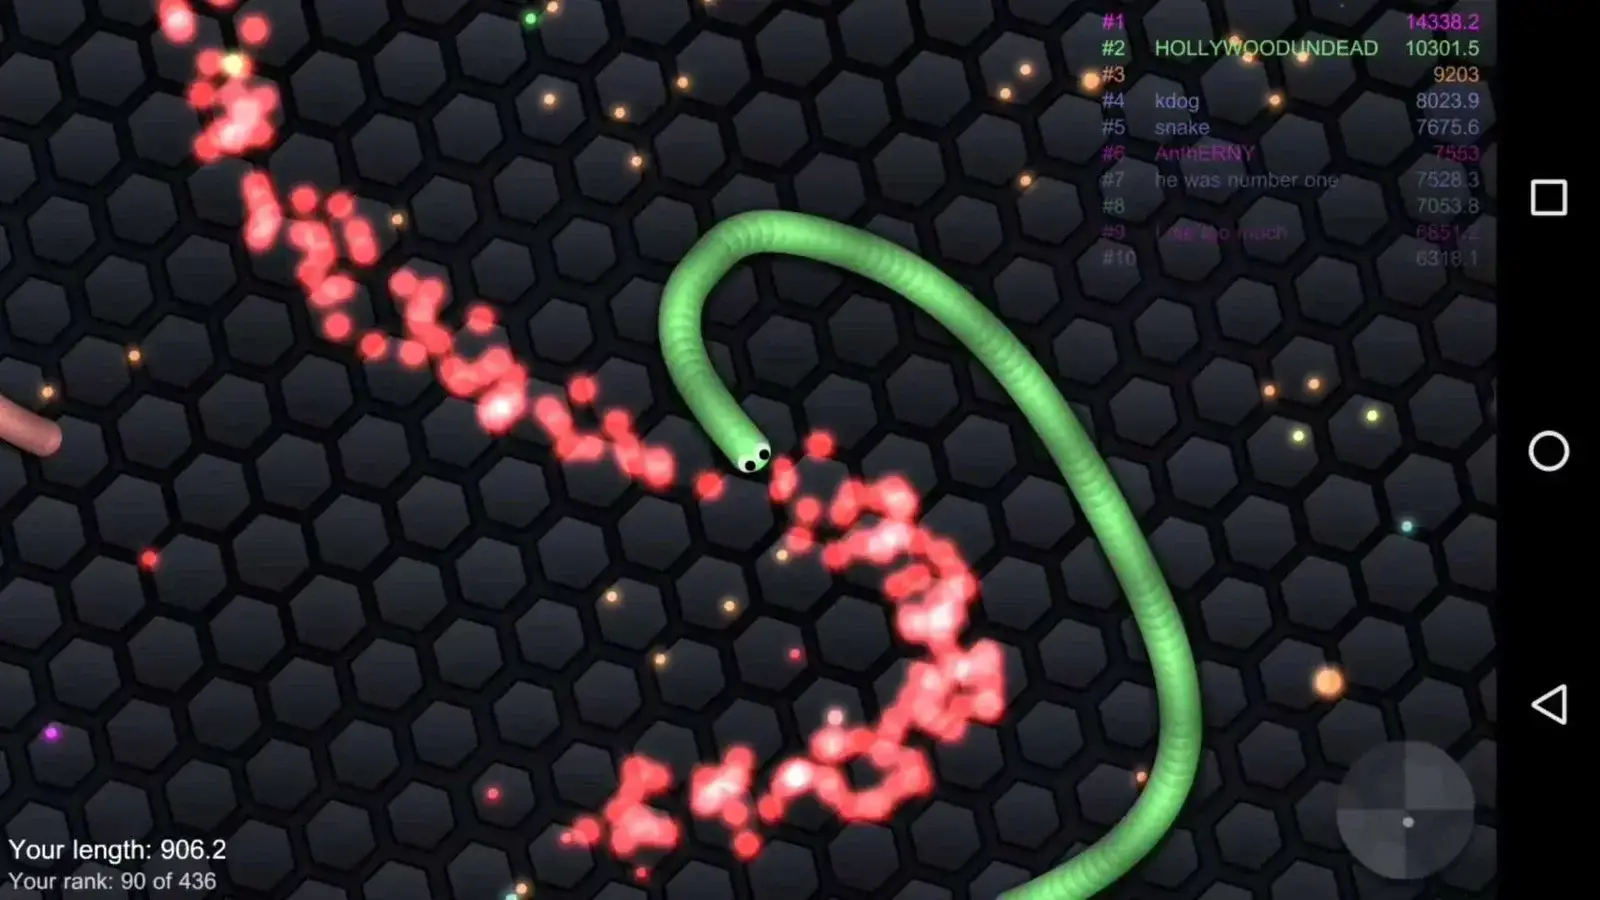 What is Slither.io? Cheats, tips and tricks for the latest